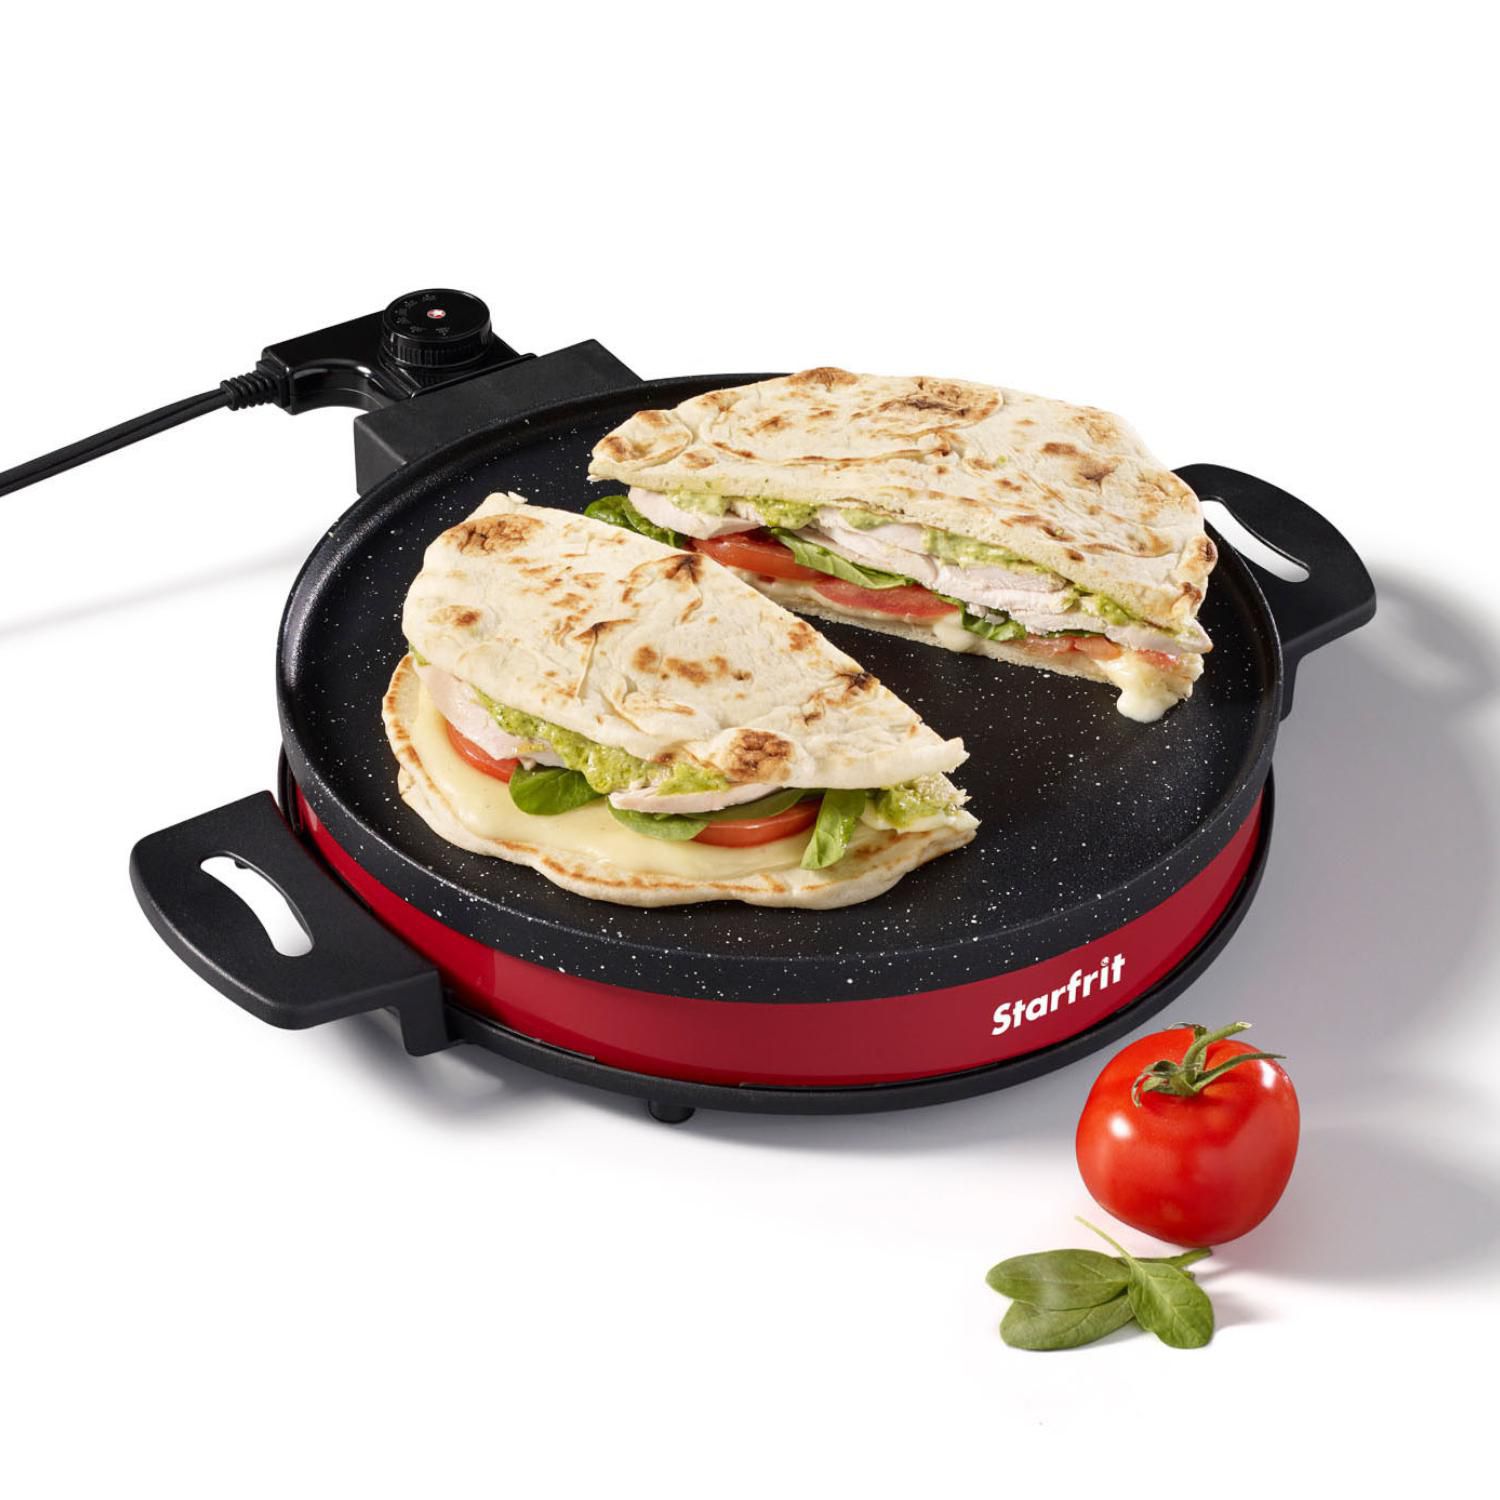 Red Starfrit 024426 The Rock 12 Electric Non-Stick Multi-Pan 